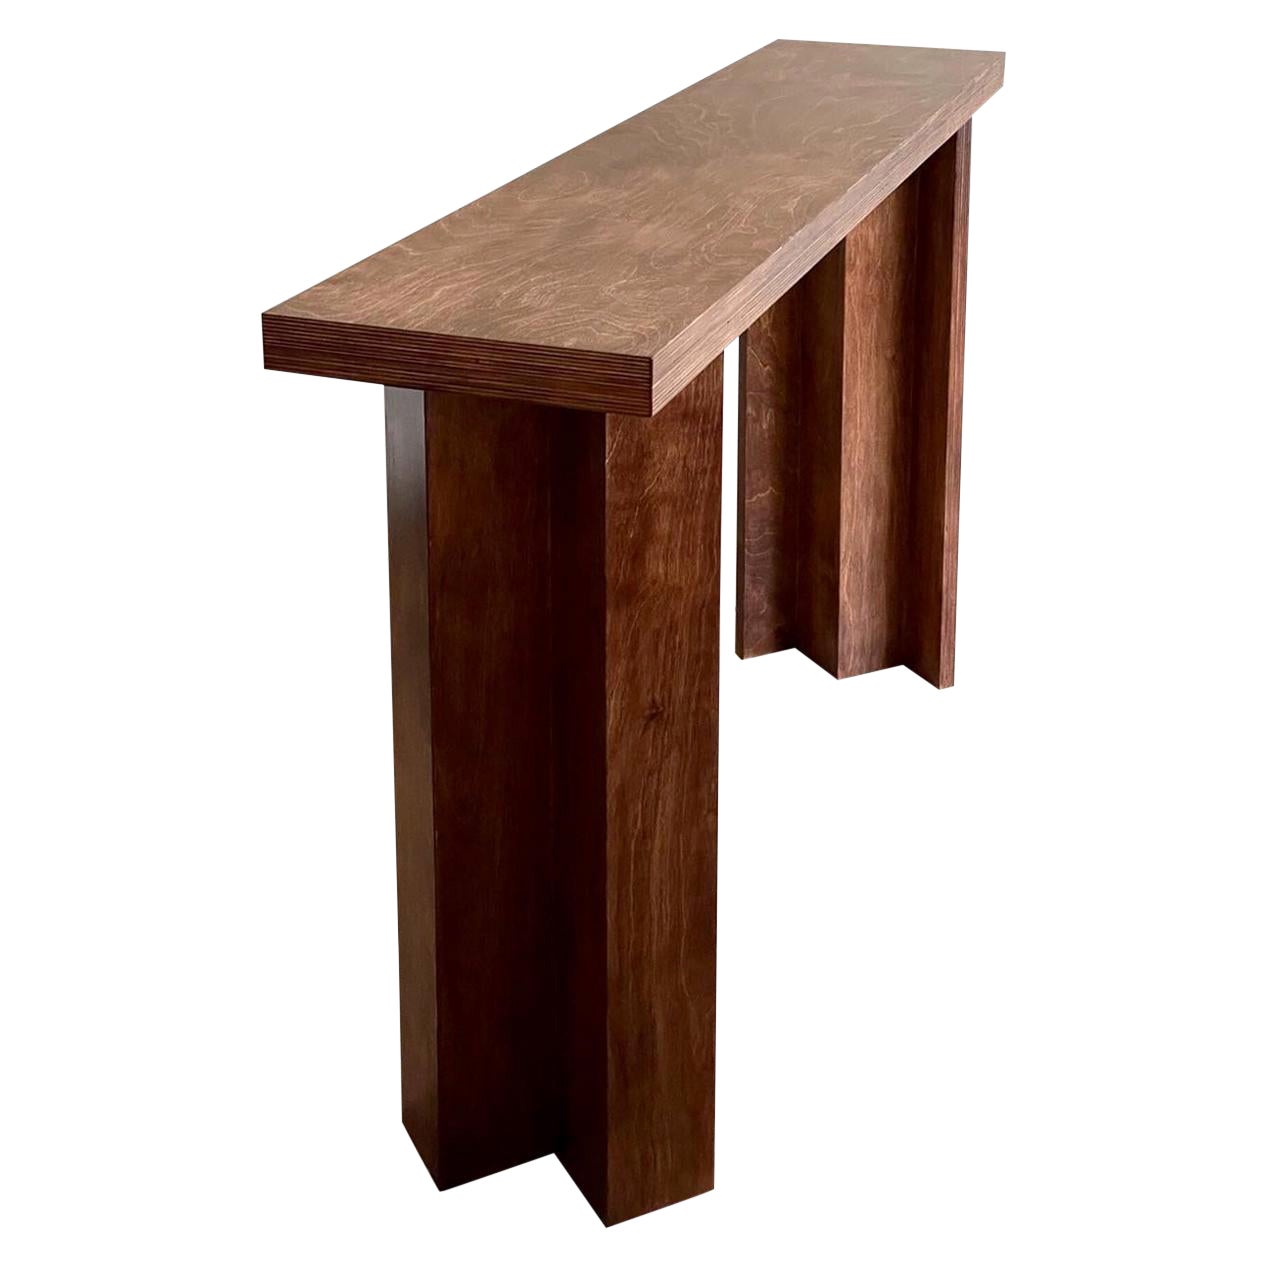 What kind of tables are used in hallways and entries?